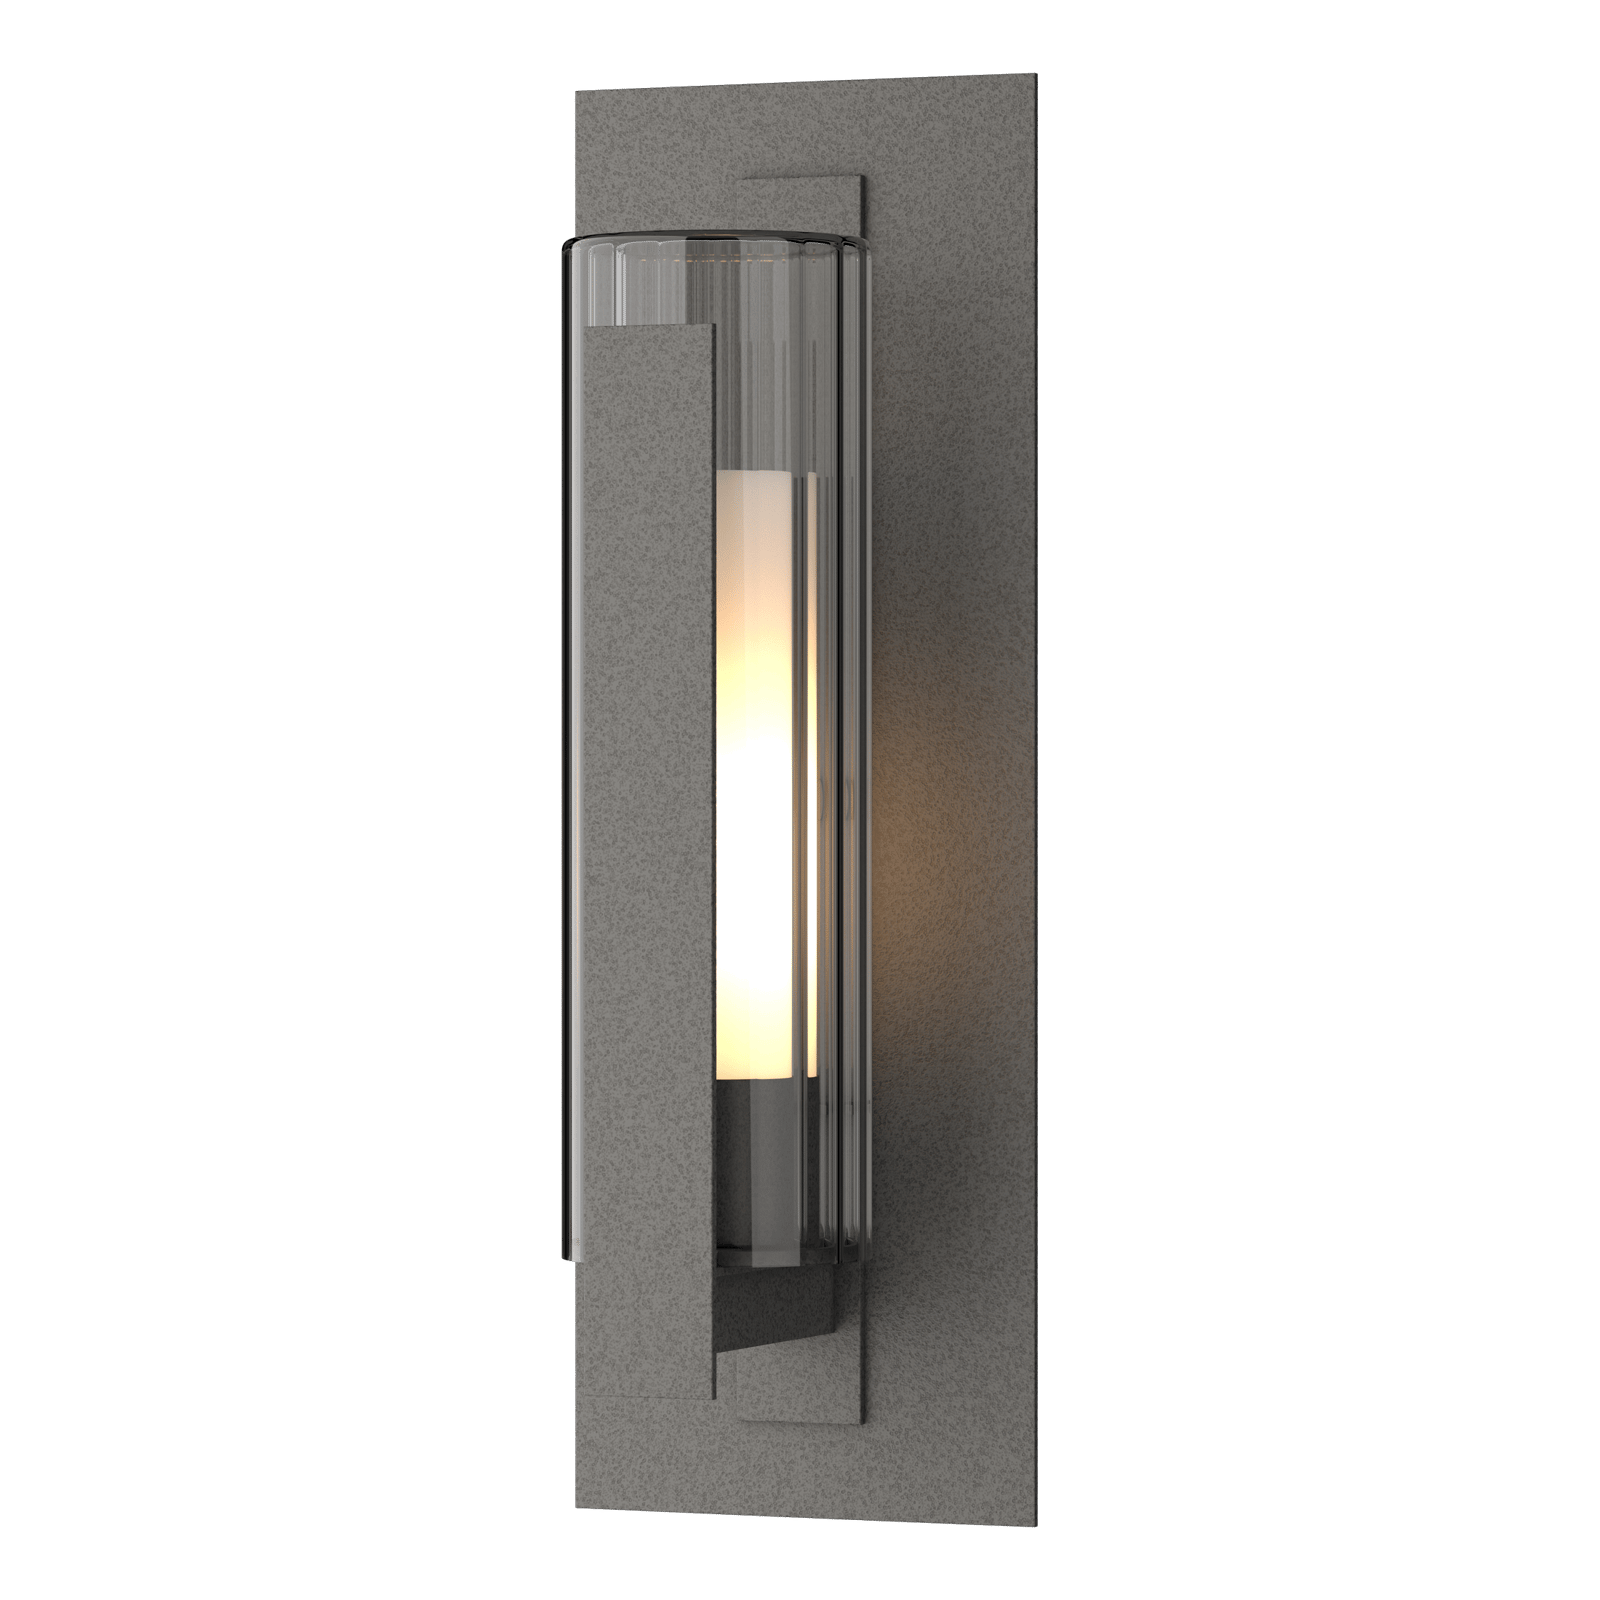 Hubbardton Forge Vertical Bar Fluted Glass Medium Outdoor Sconce Outdoor l Wall Hubbardton Forge Coastal Natural Iron Clear Glass with Opal Diffuser (ZU) 